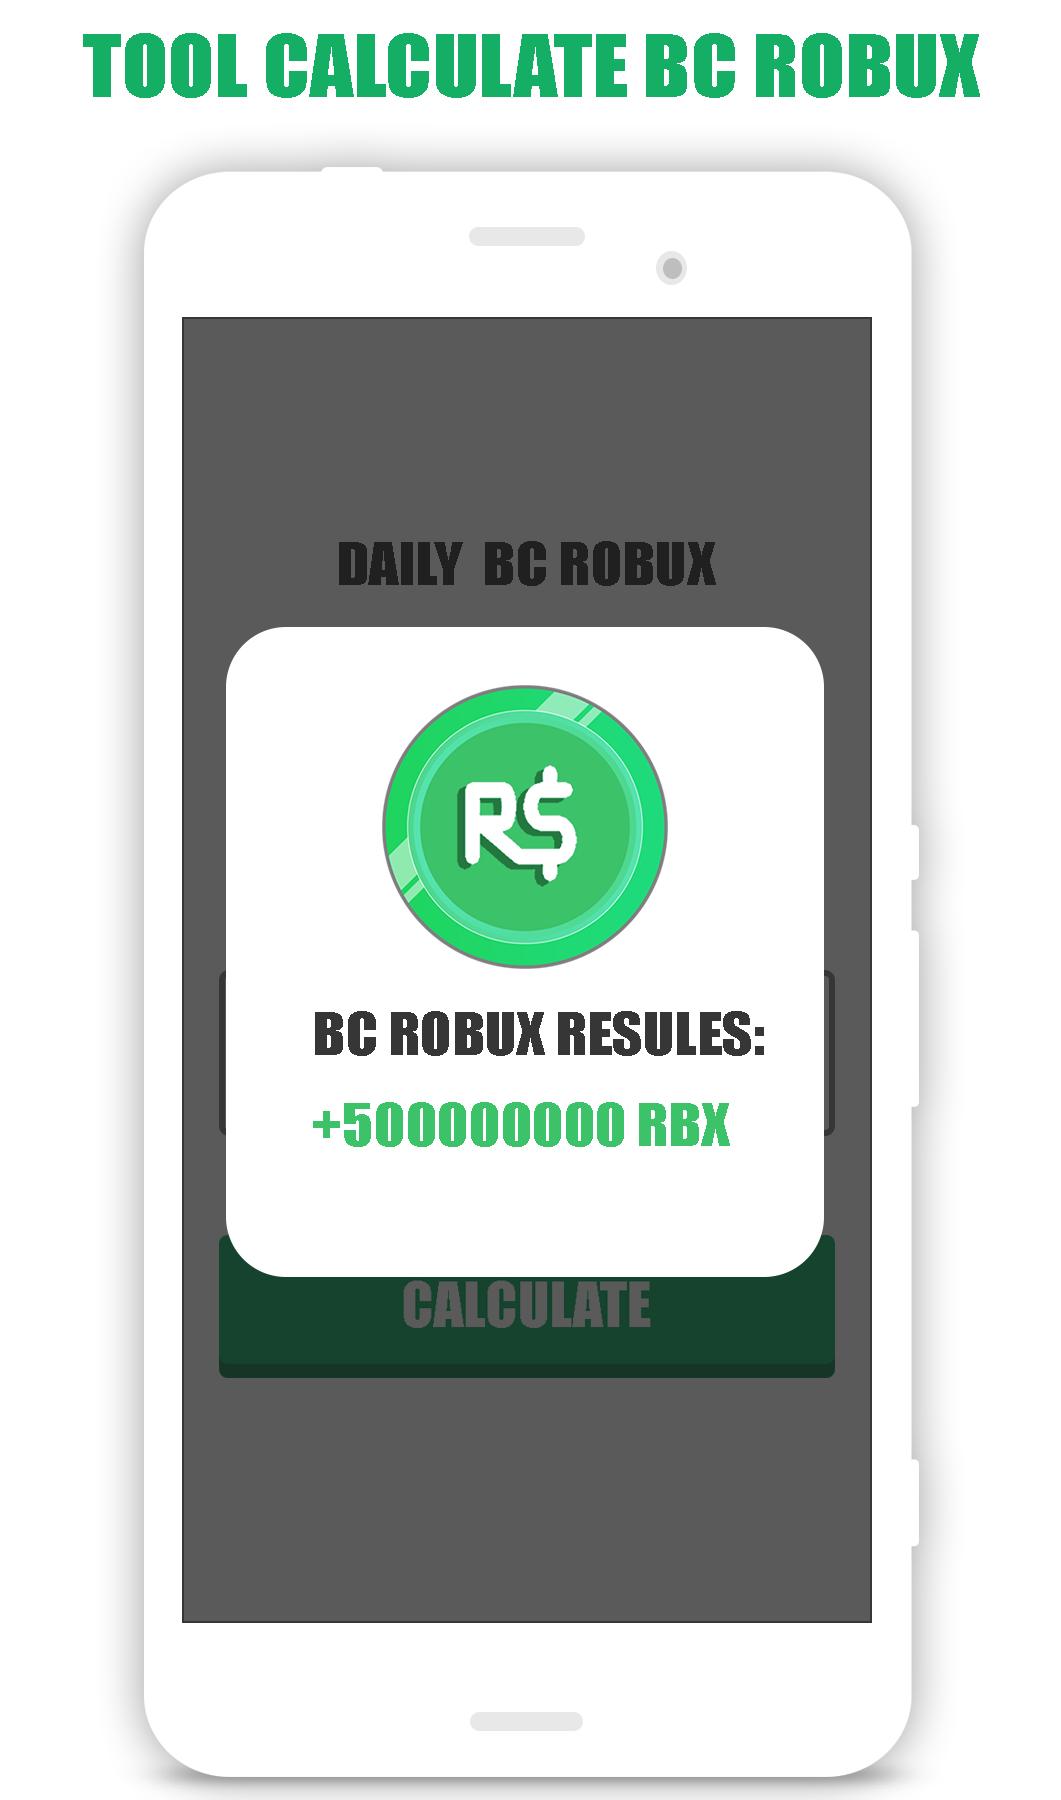 Free Robux Calculator For Roblox For Android Apk Download - free robux calculator for rblox rbx magnet apk by sundwish